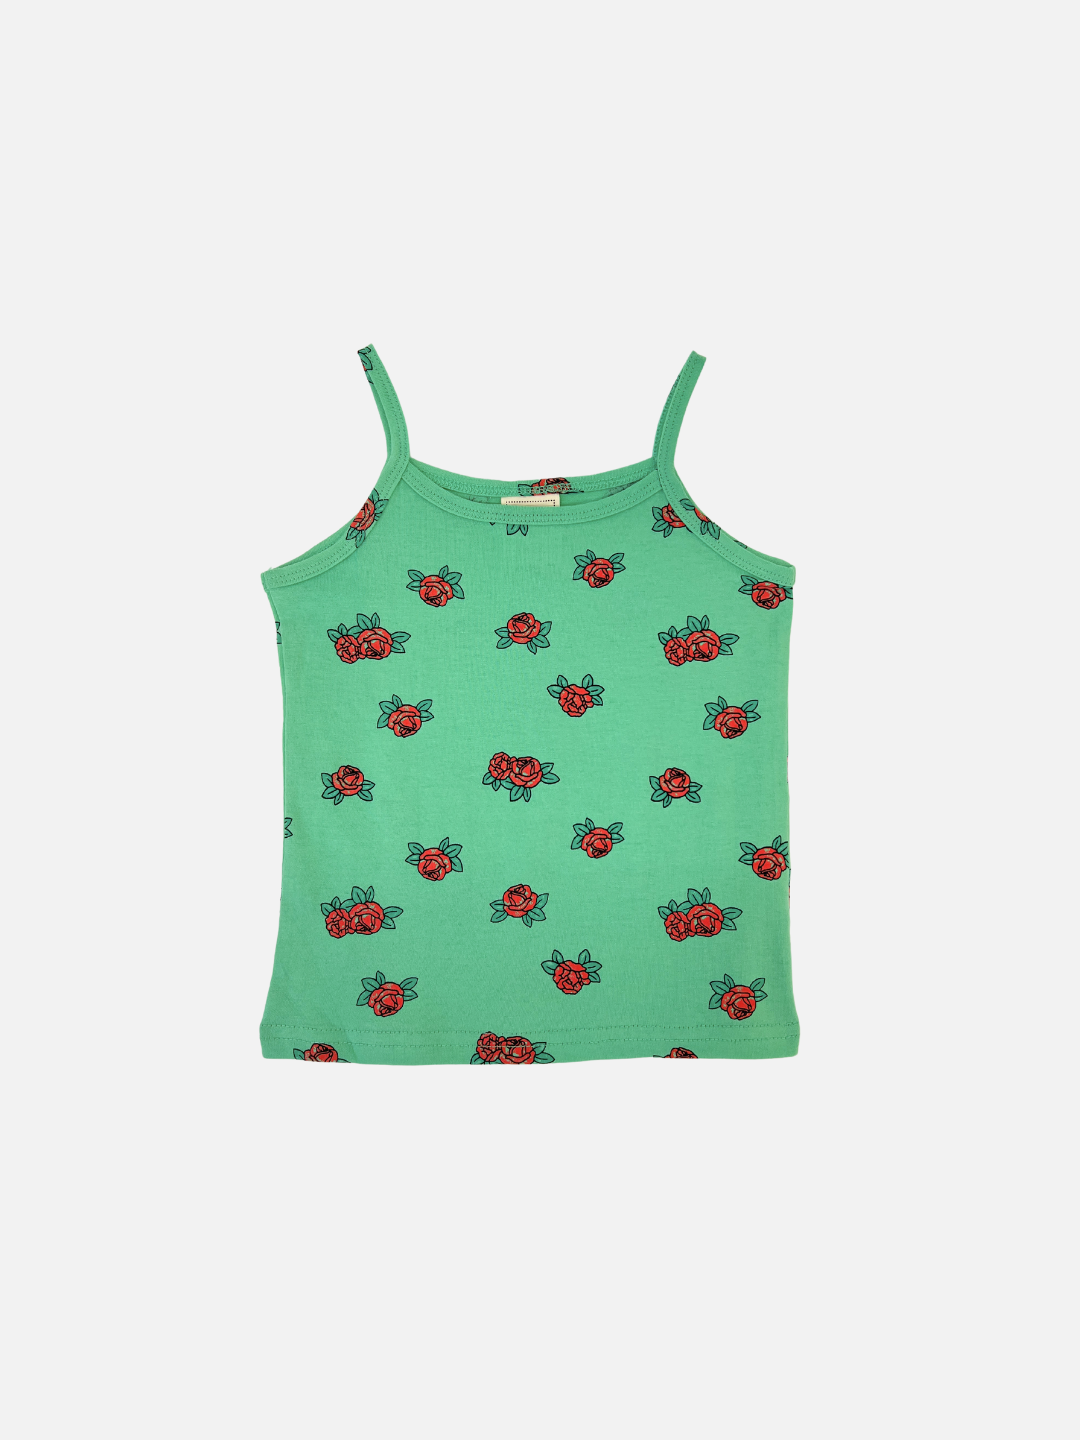 Front view of the kid's roses tank top in Green with red roses all-over print